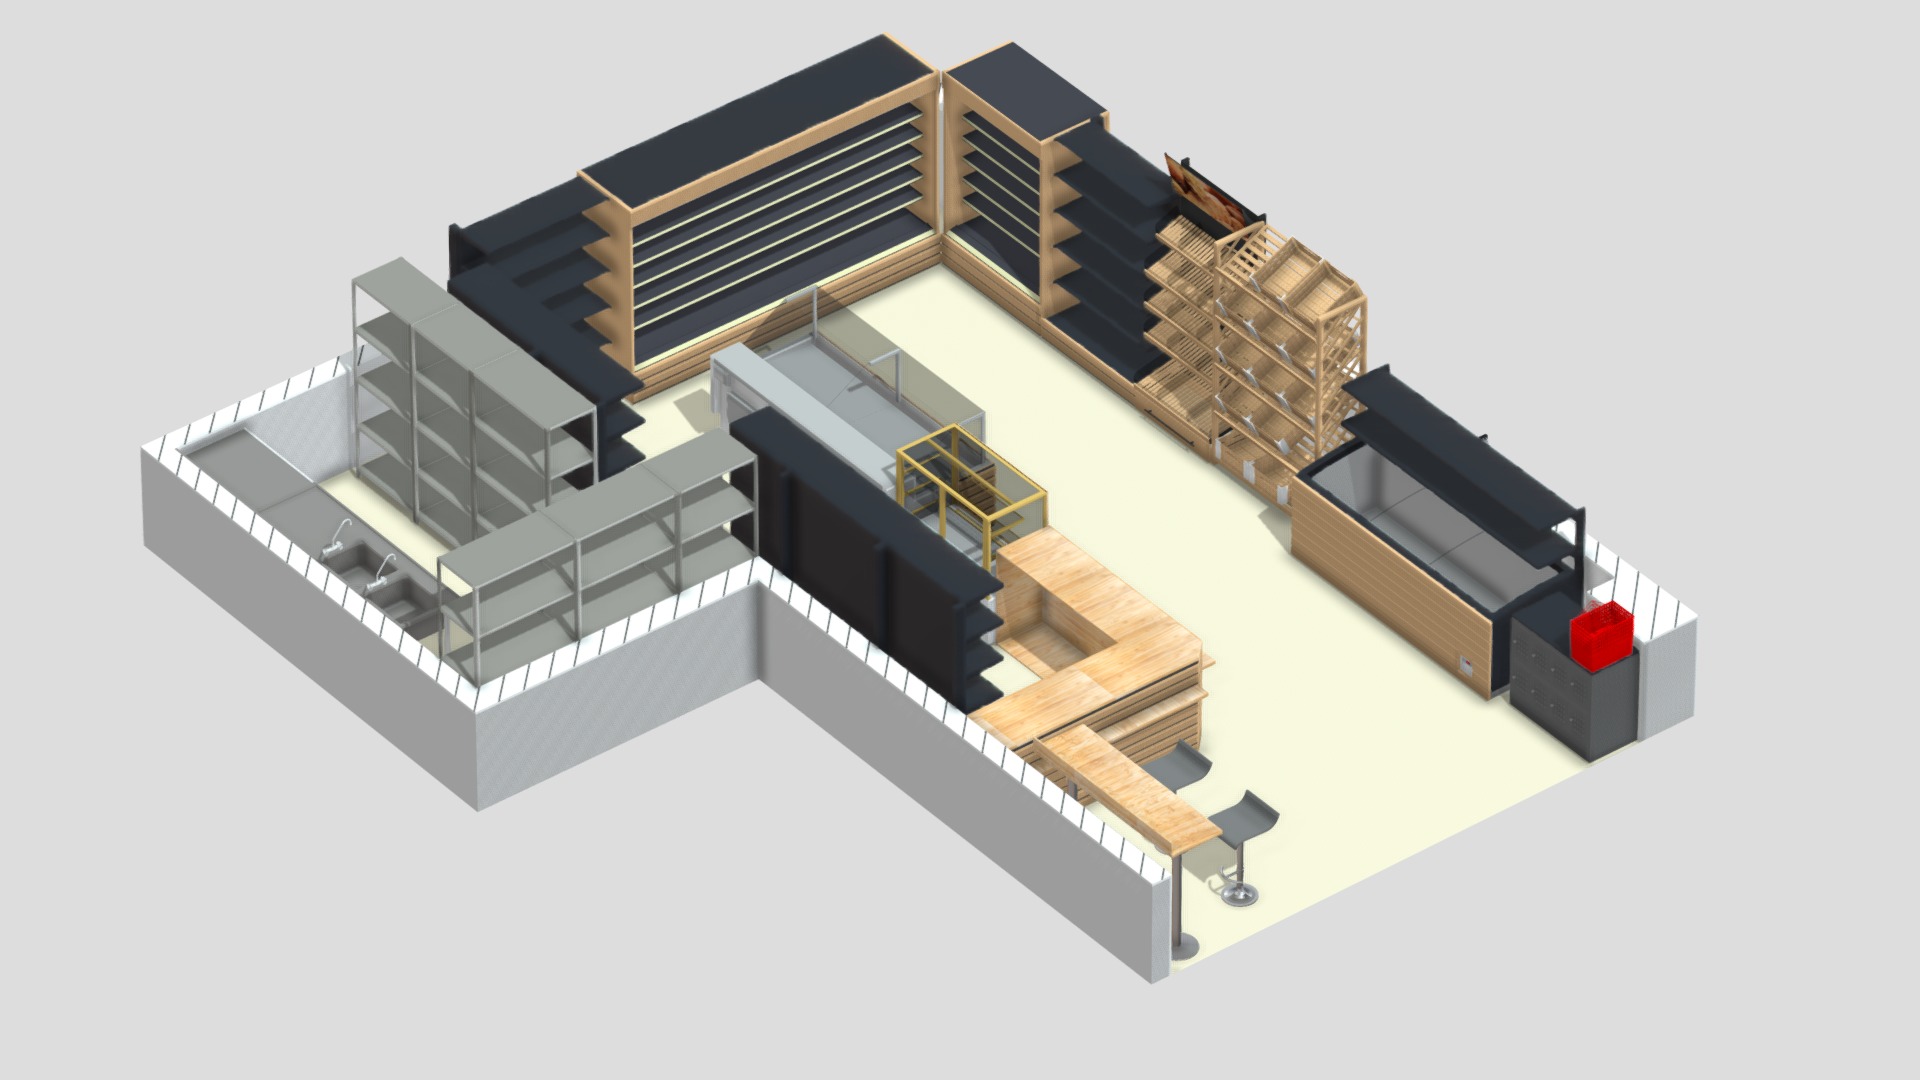 3D model проект готово - This is a 3D model of the проект готово. The 3D model is about a model of a house.